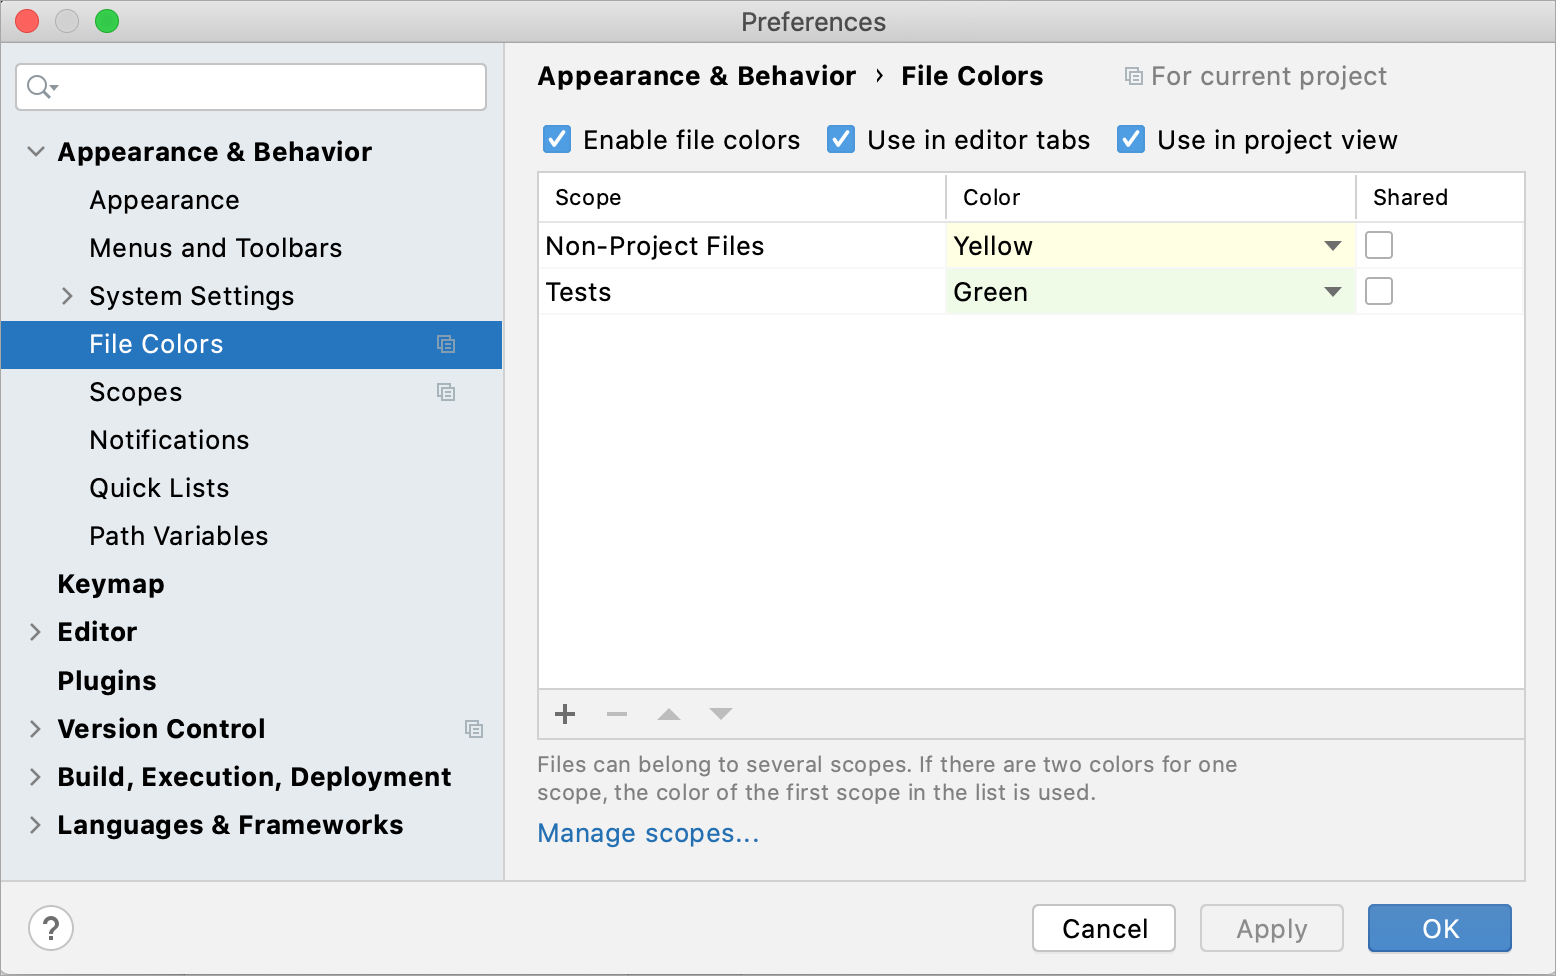 Configuring file colors in Settings